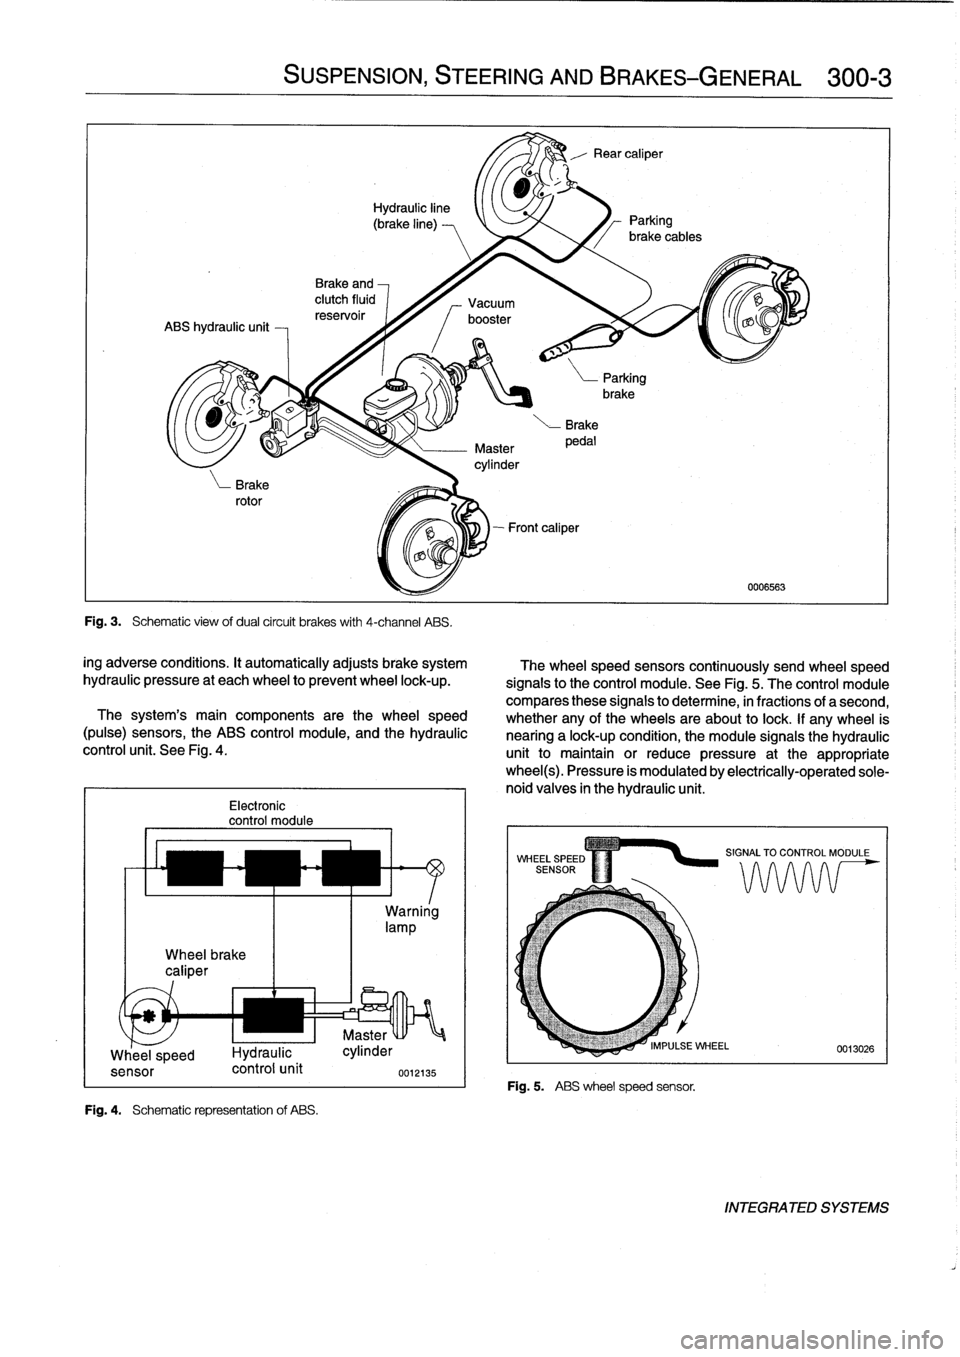 BMW 323i 1998 E36 User Guide 
Wheel
brake
caliper

Electronic
control
module
Fig
.
4
.

	

Schematic
representation
of
ABS
.

SUSPENSION,
STEERING
ANDBRAKES-GENERAL

	

300-3

Fig
.
3
.

	

Schematic
view
ofdual
circuit
brakes
wi